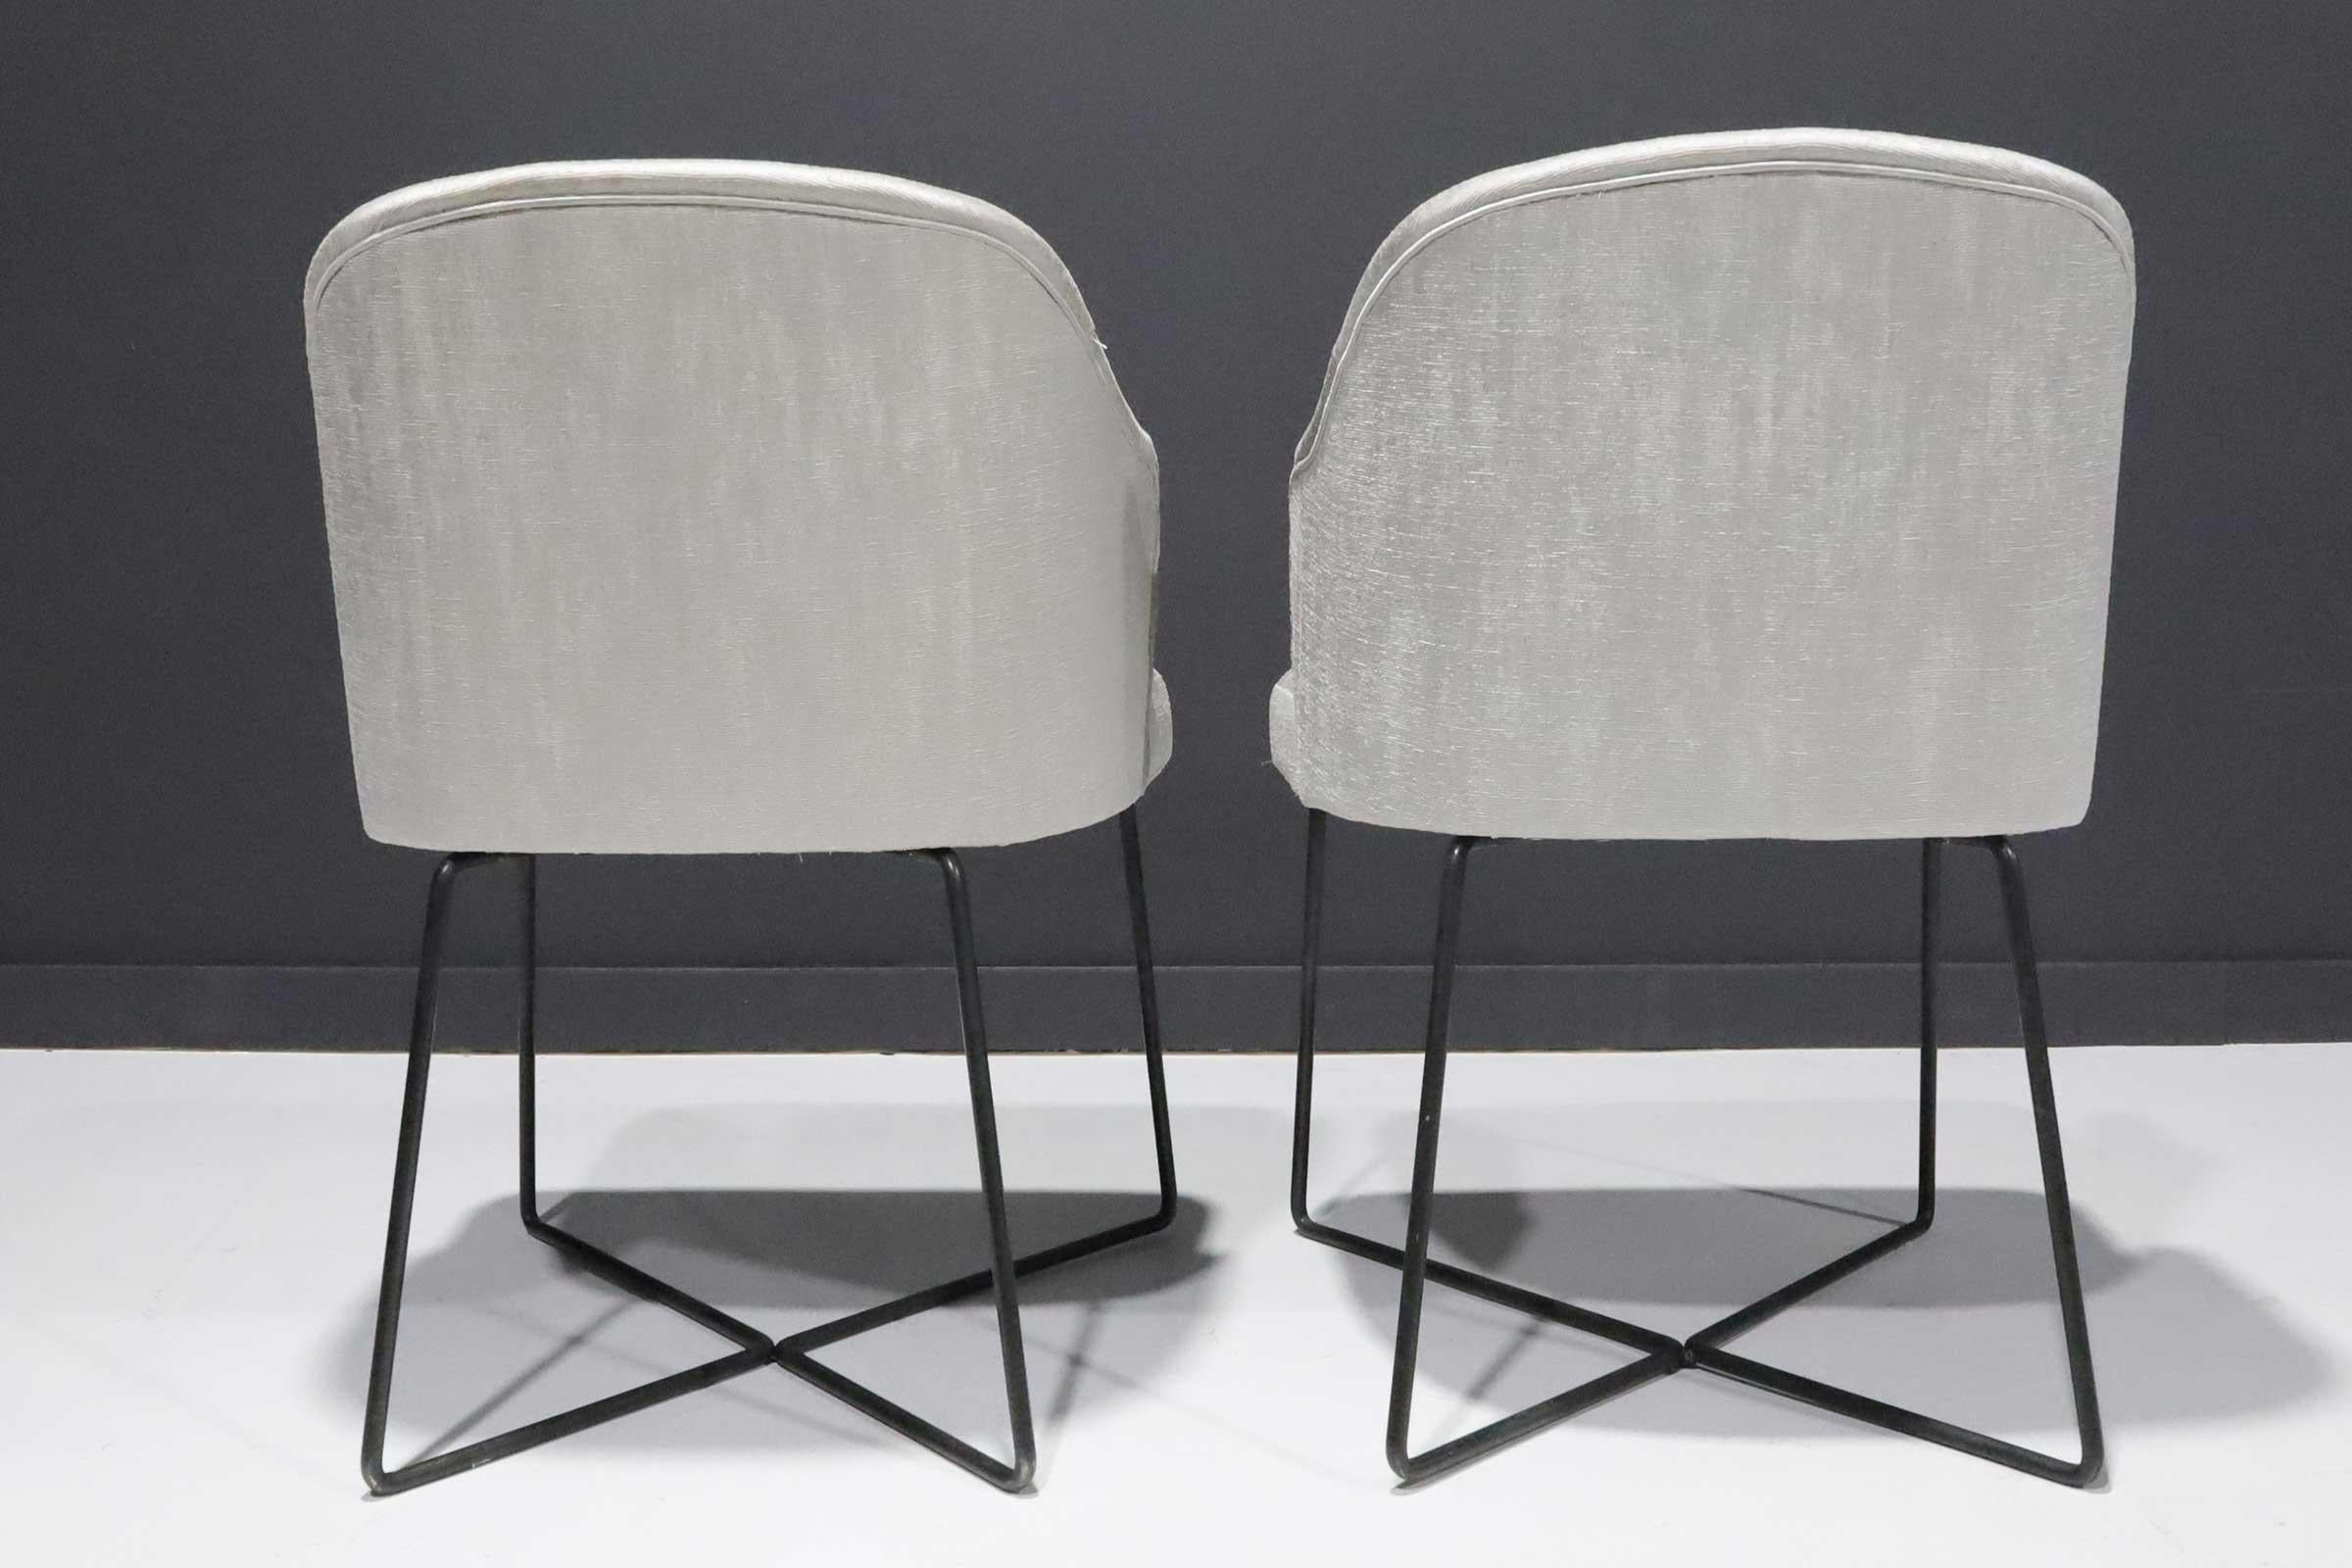 Italian Pair of Rodolfo Dordoni for Minotti Leslie Dining or Side Chairs